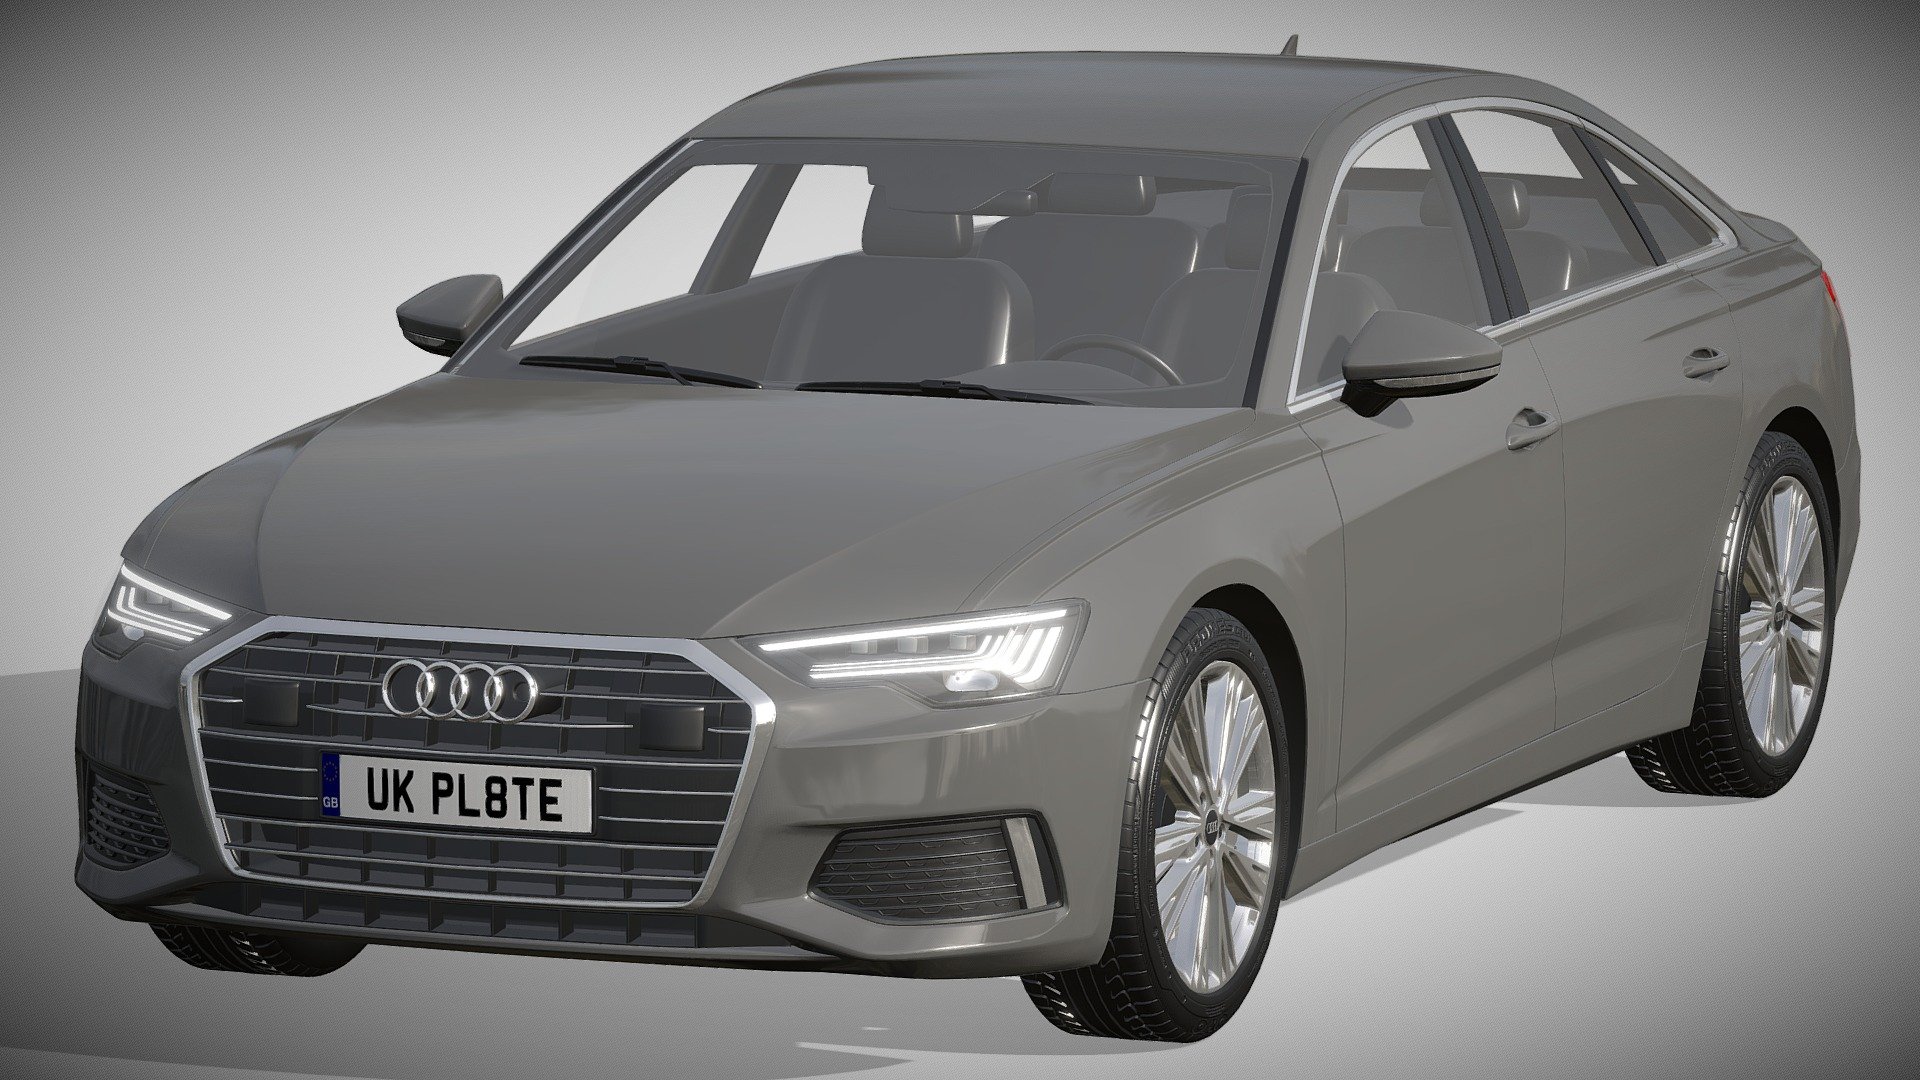 Audi A6 Limousine

https://www.audi.de/de/brand/de/neuwagen/a6/a6-limousine.html

Clean geometry Light weight model, yet completely detailed for HI-Res renders. Use for movies, Advertisements or games

Corona render and materials

All textures include in *.rar files

Lighting setup is not included in the file! - Audi A6 Limousine - Buy Royalty Free 3D model by zifir3d 3d model